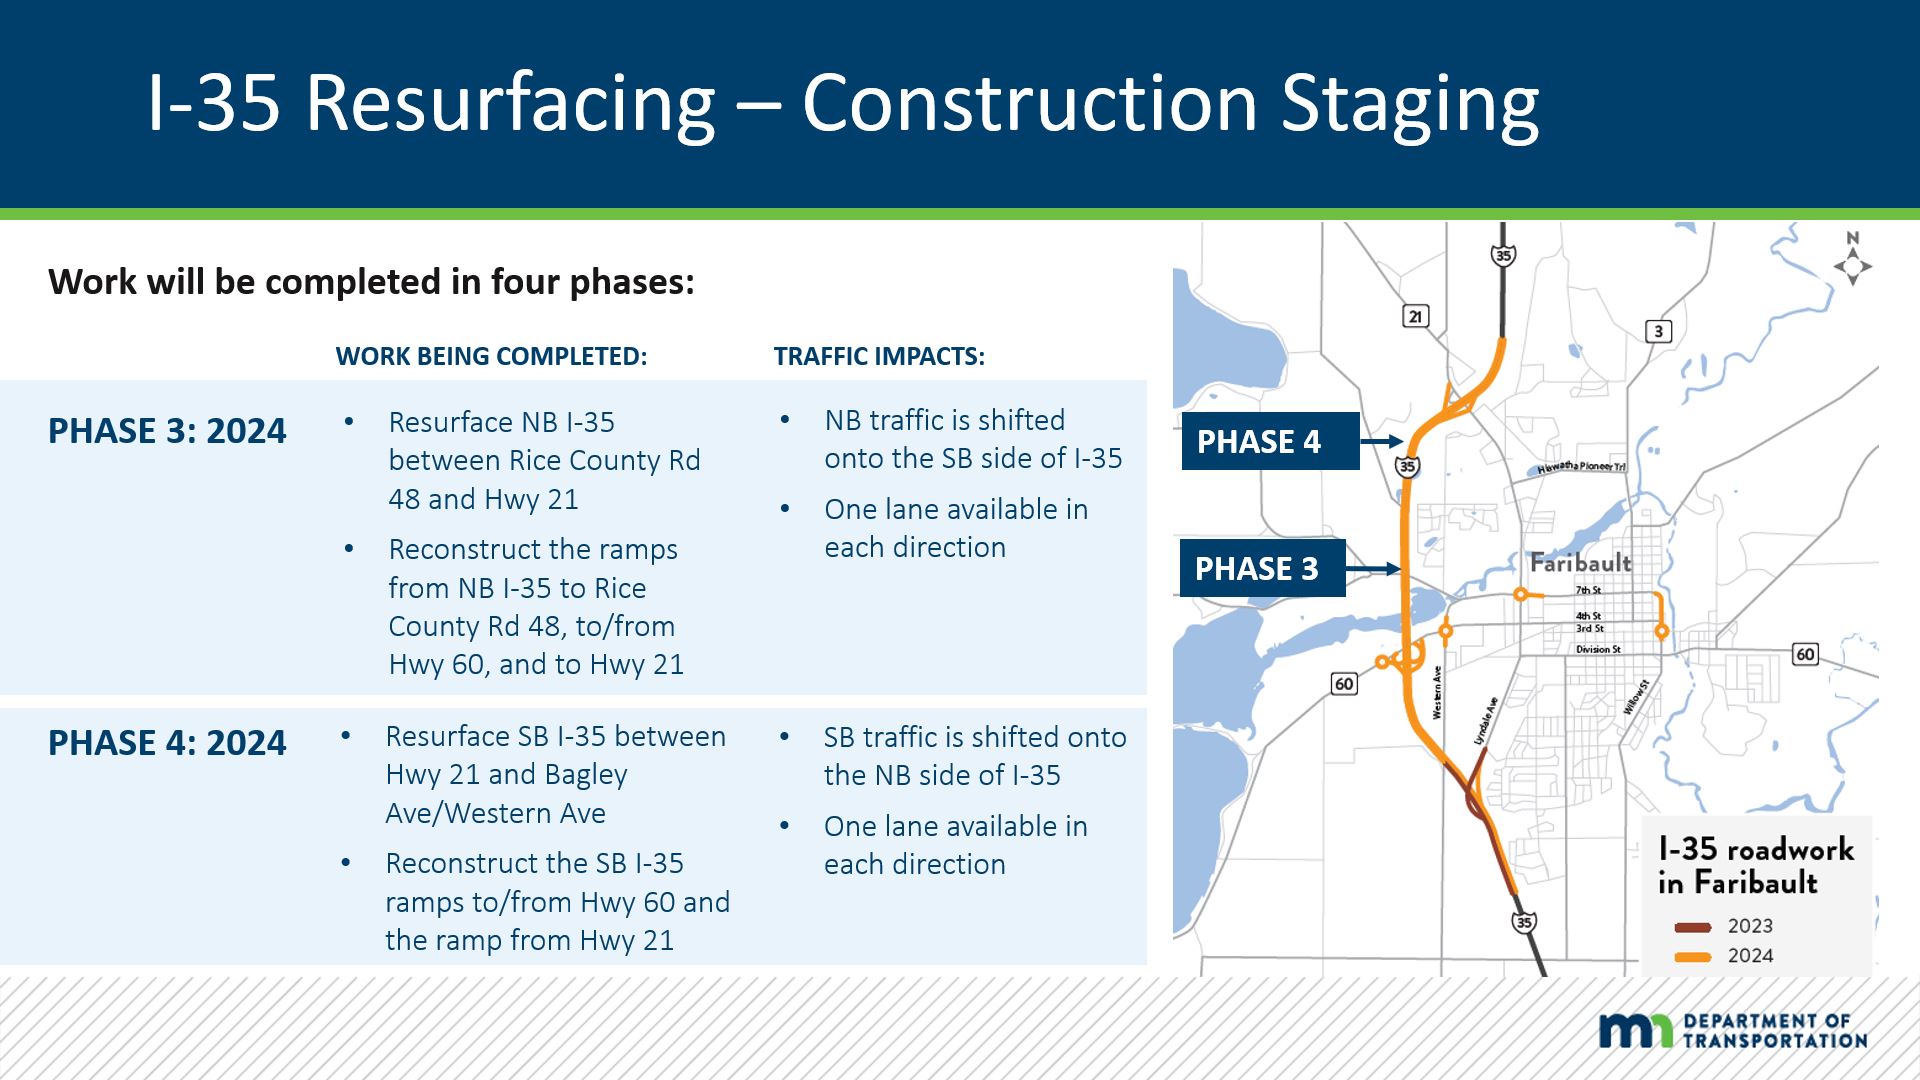 I-35 project description of Phase 3 and 4